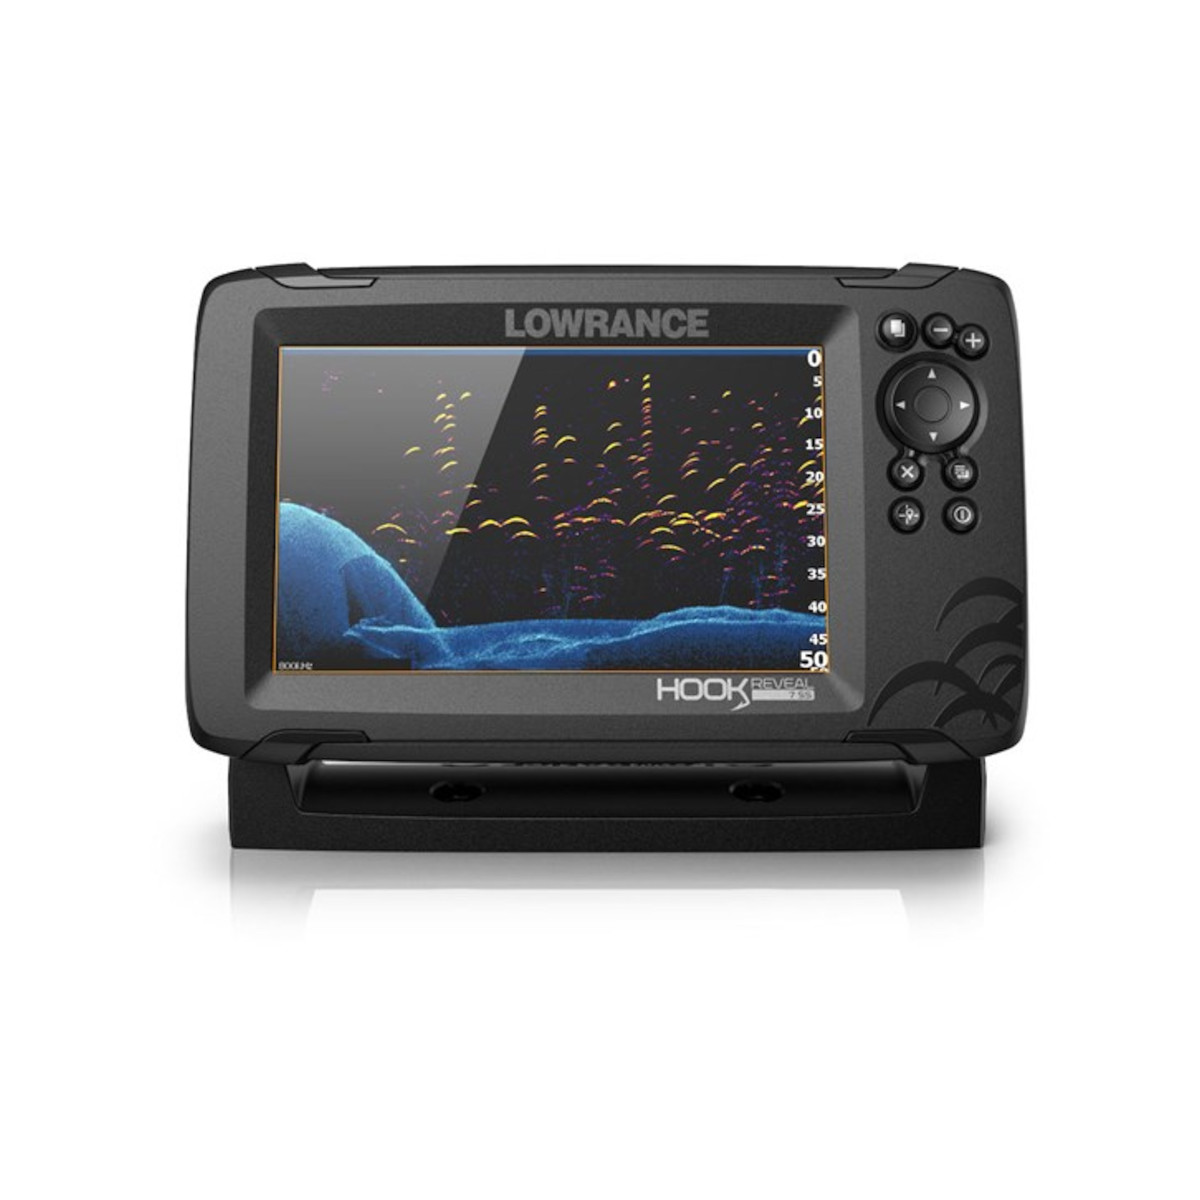 Lowrance HOOK Reveal 7 kaartplotter incl. 50/200 HDI transducer